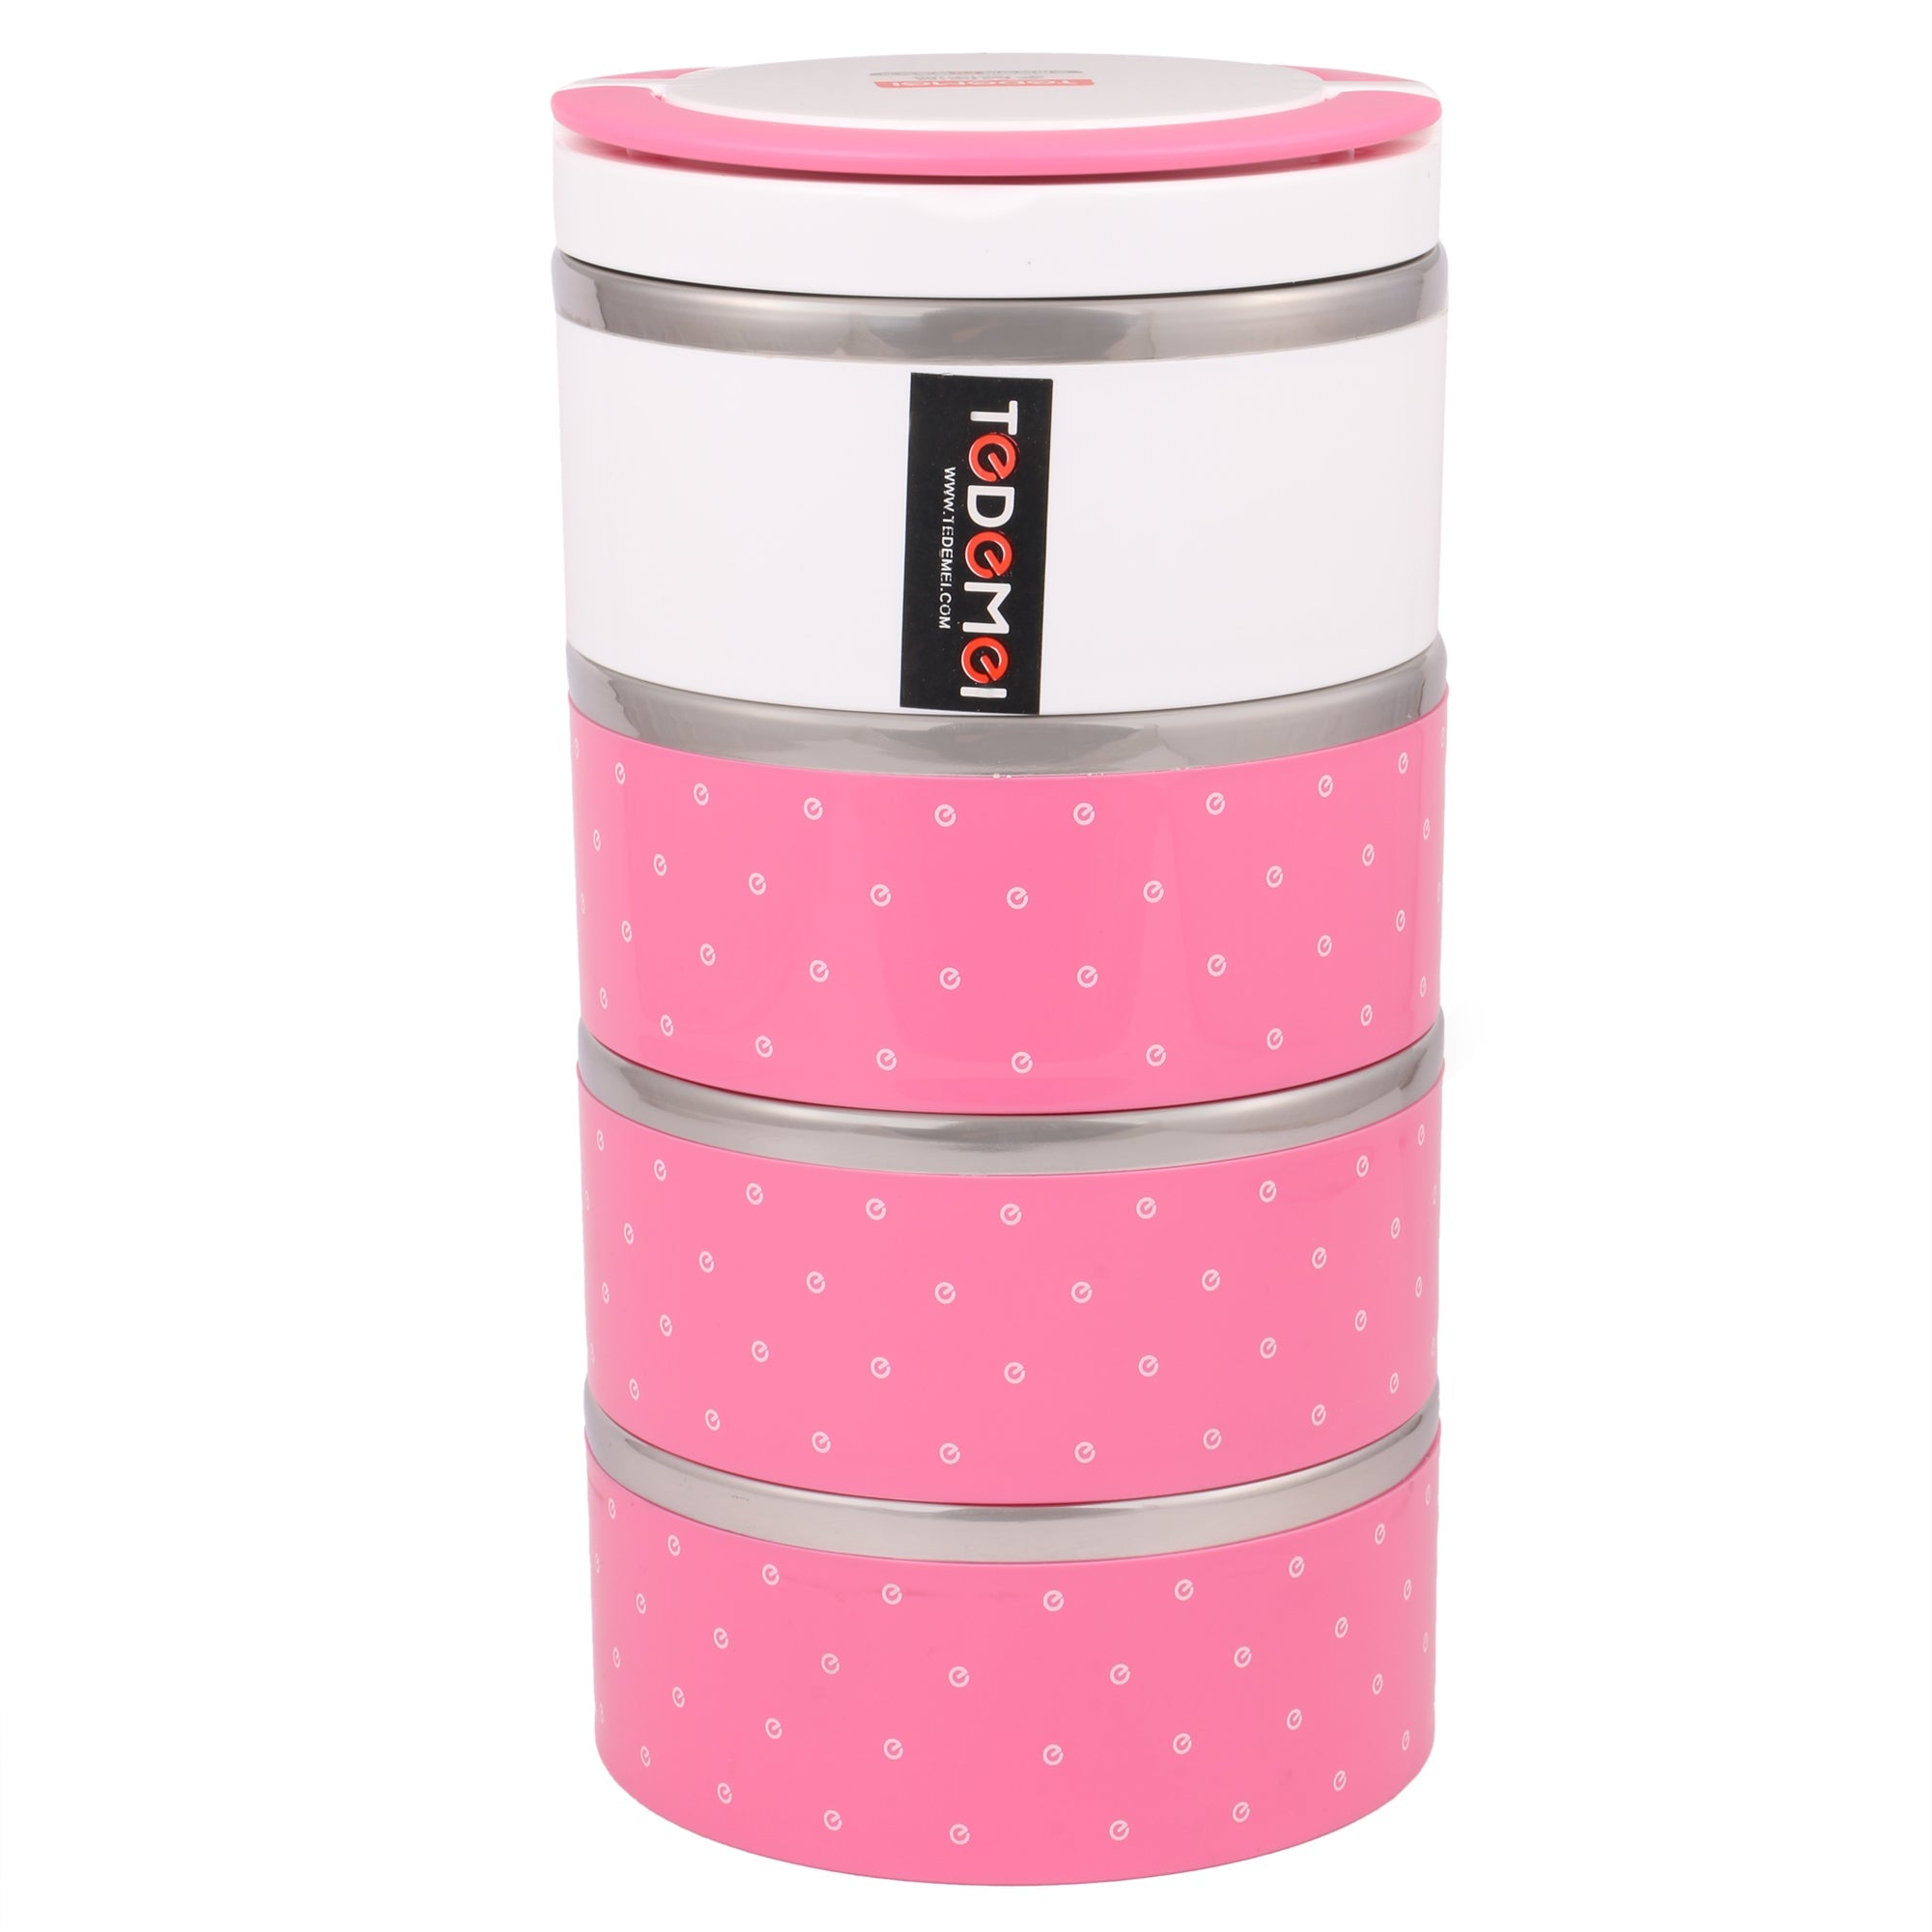 Stainless Steel 4 Layer Storage Insulated Lunch Box 6518